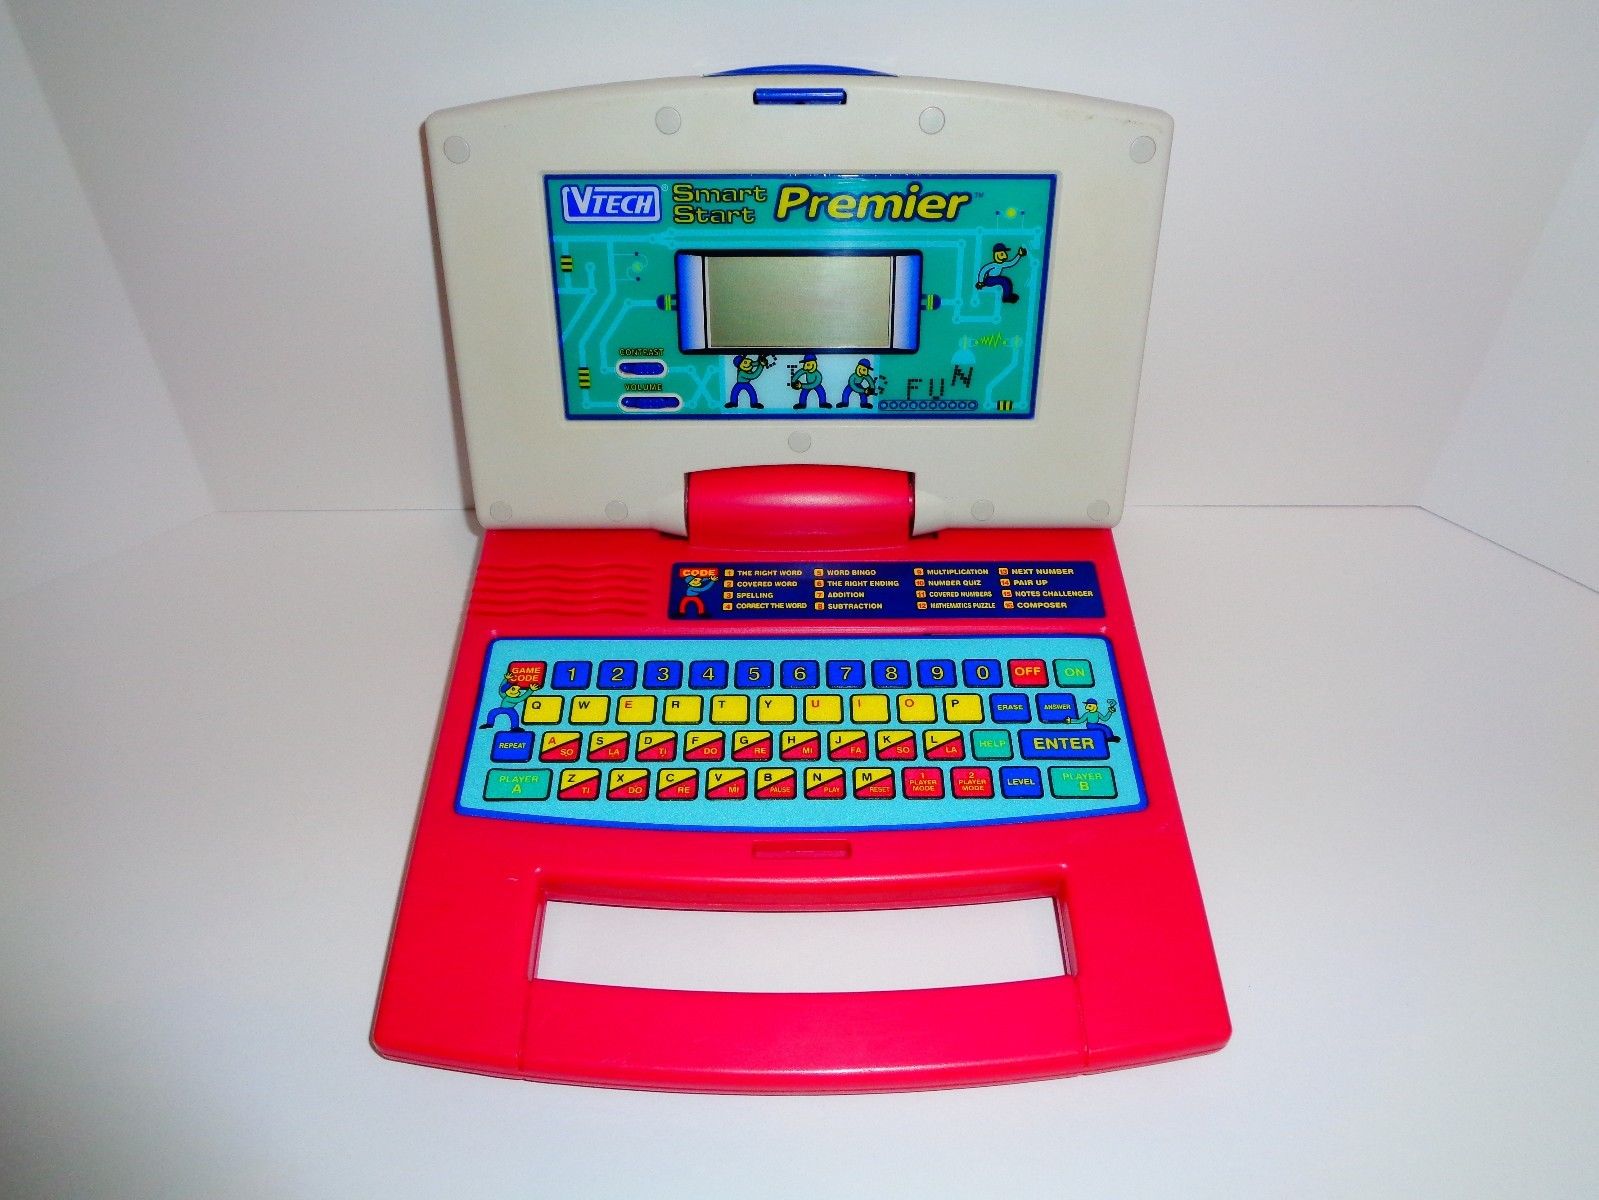 13 Educational Toys That Made Us Feel Like We Were Super Technologically Advanced